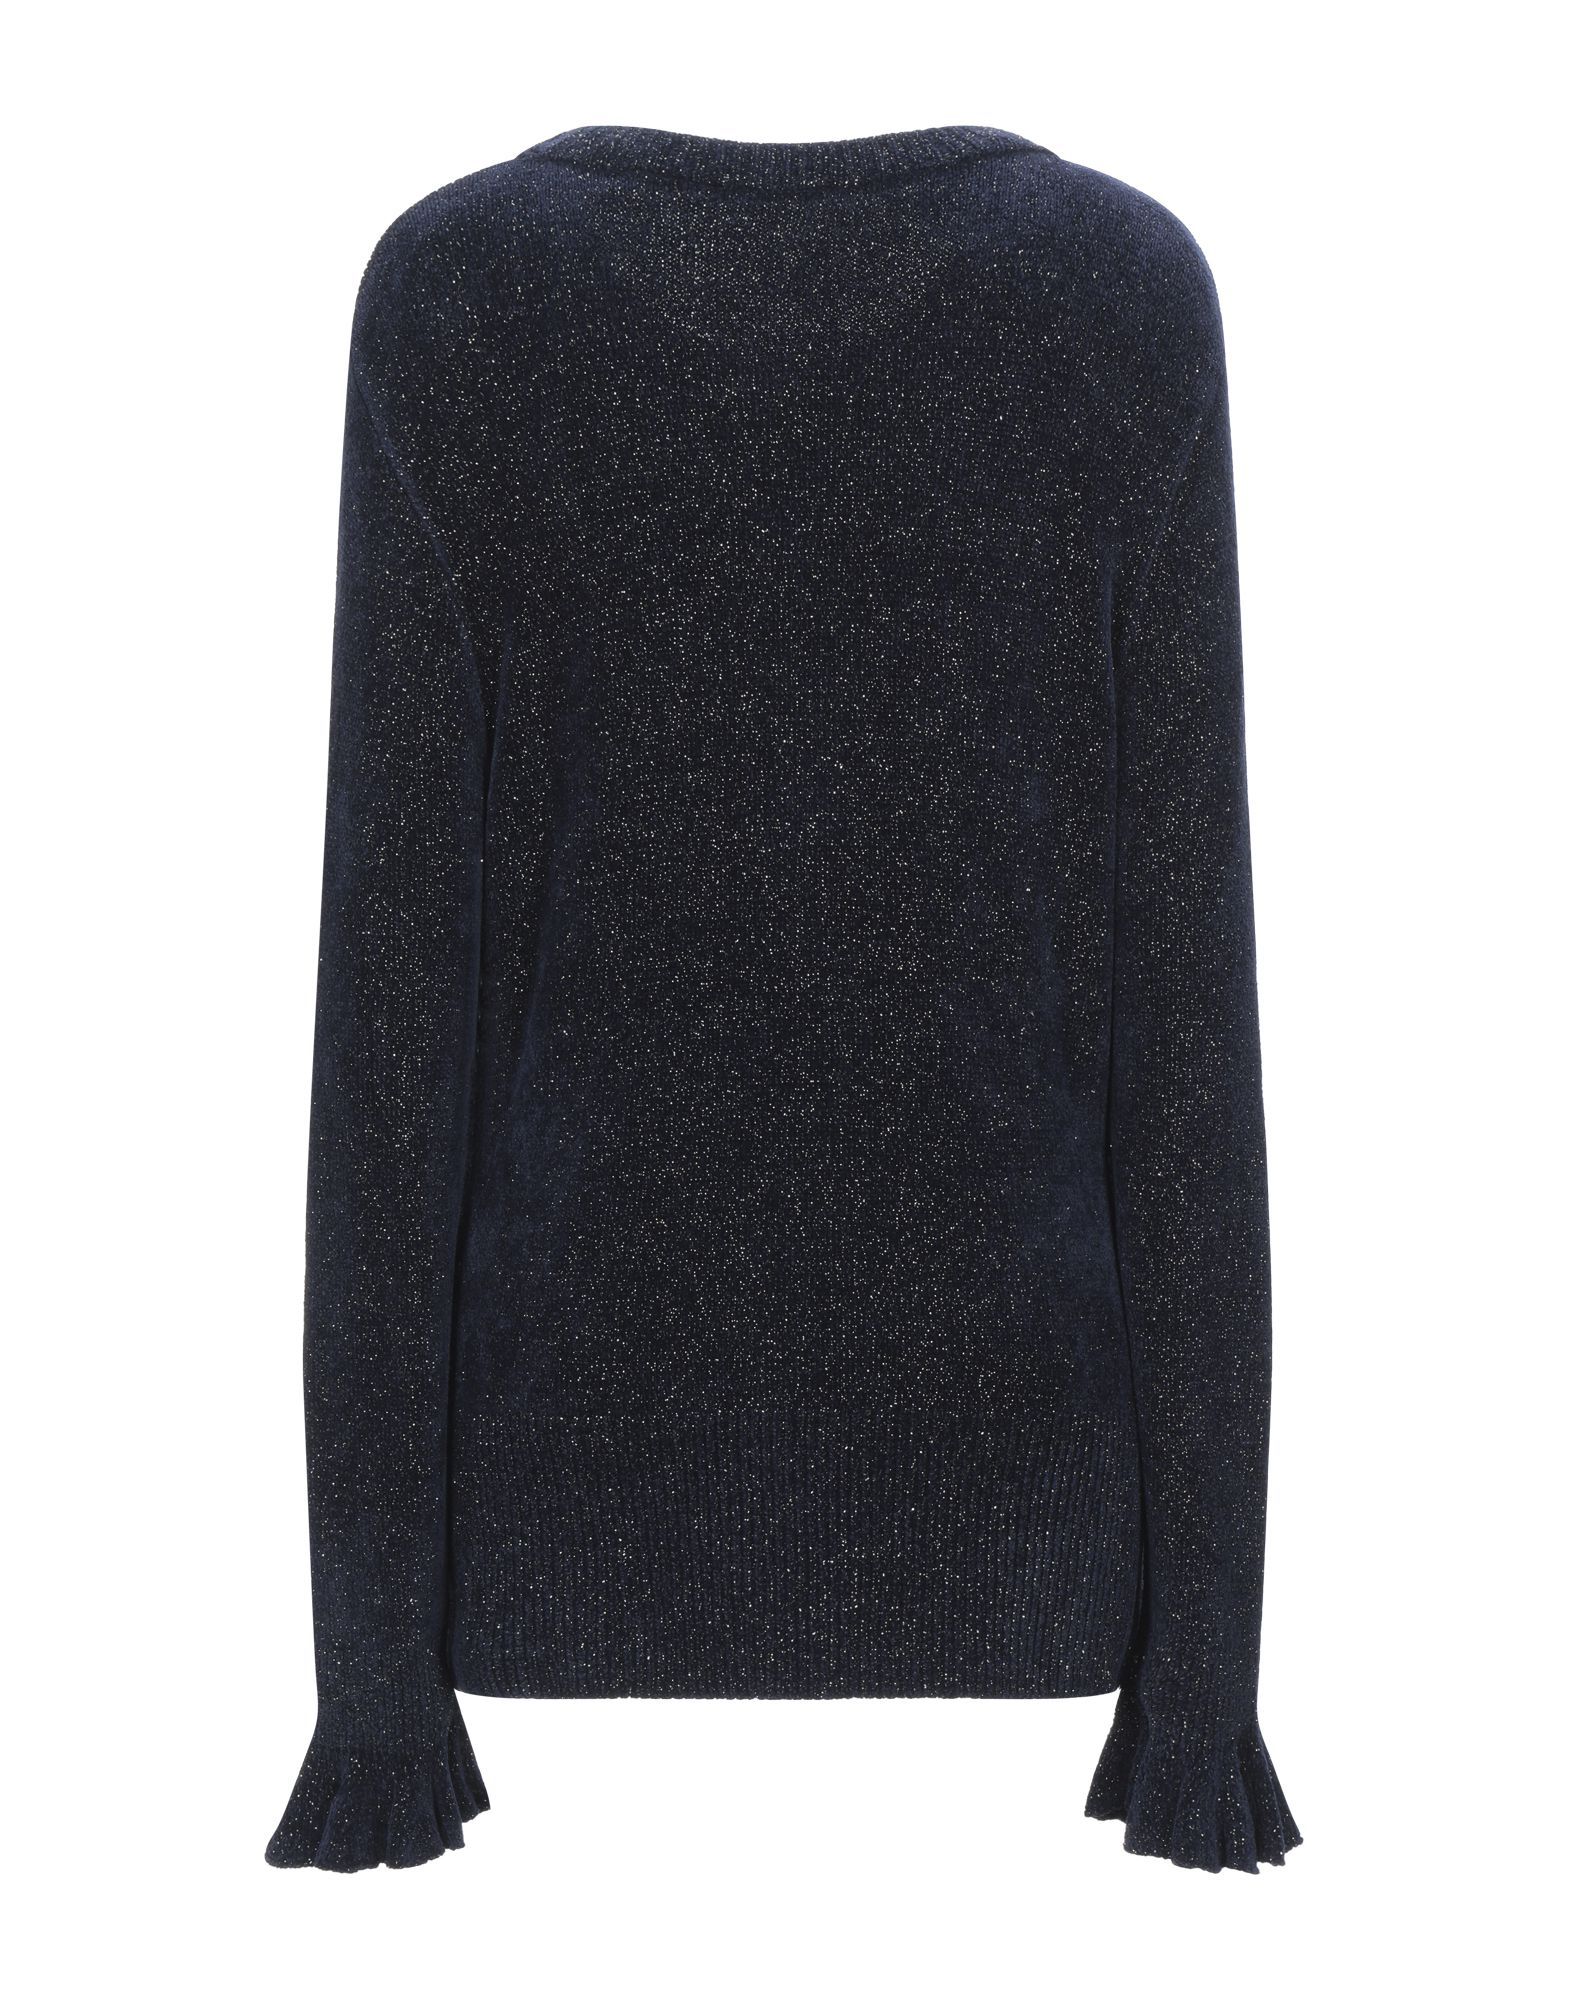 knitted, lamé, no appliqués, solid colour, mélange, round collar, medium-weight knitted, long sleeves, no pockets